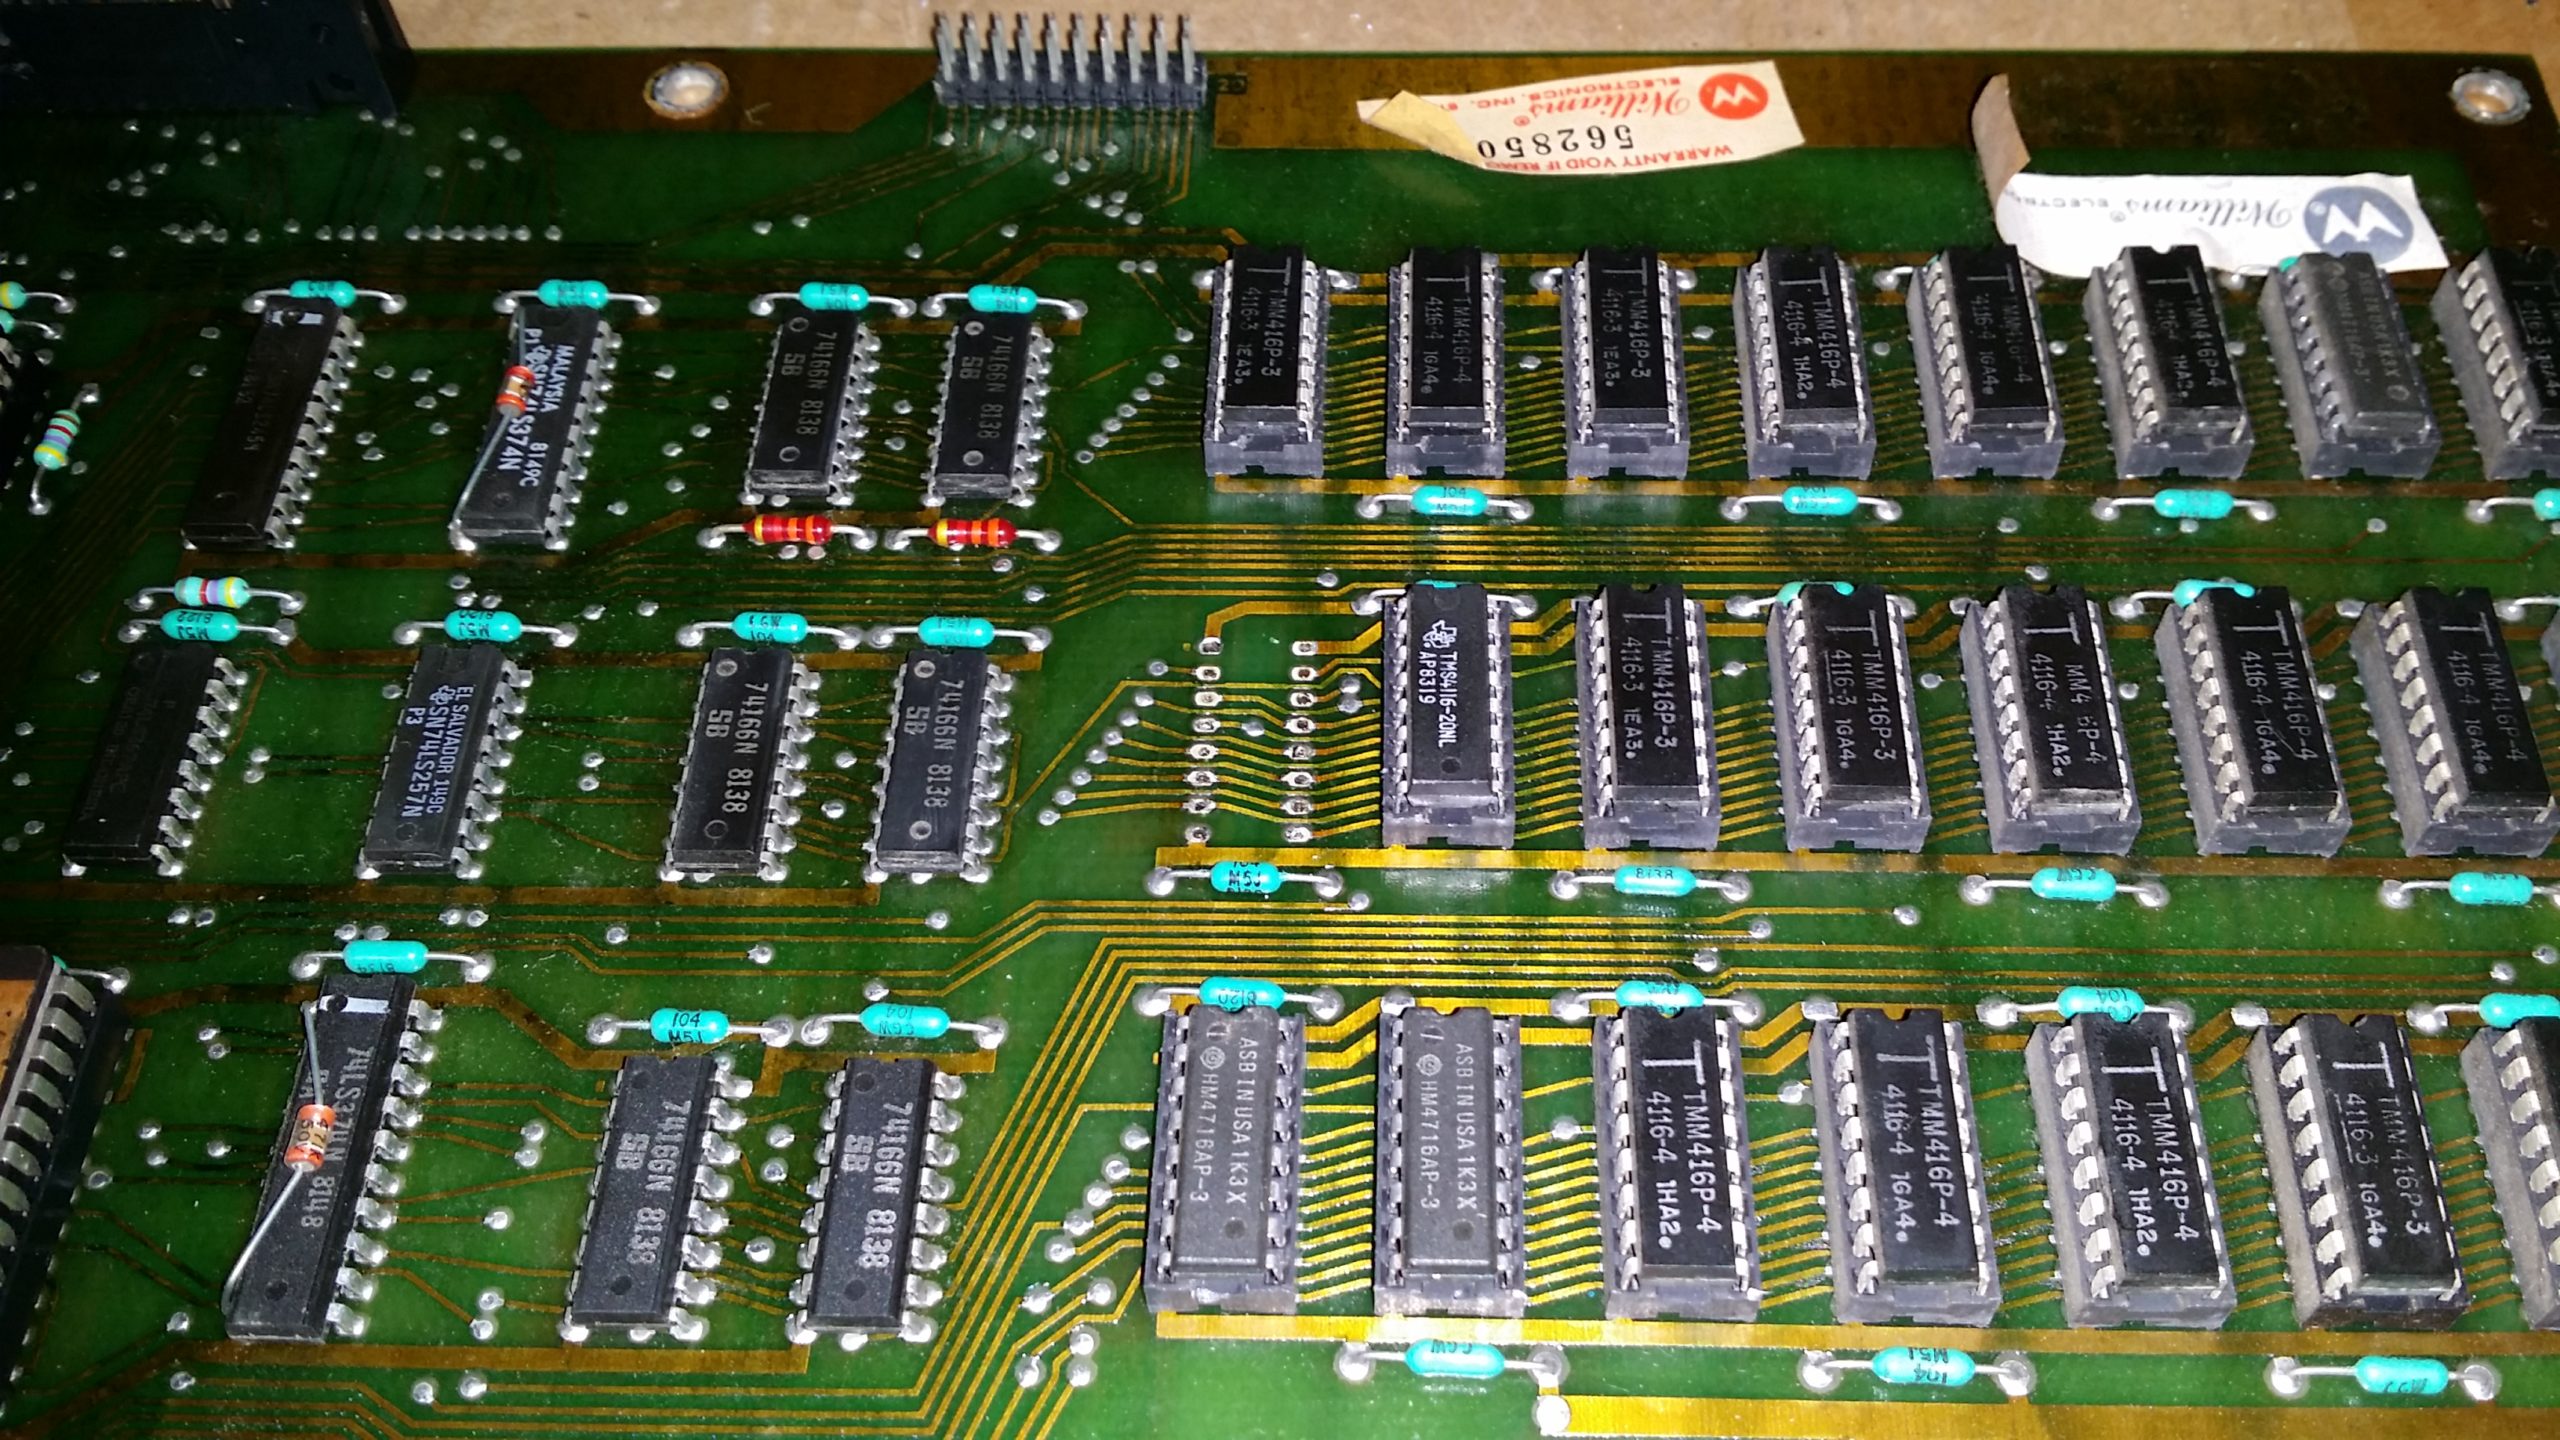 RAM chip removed on main board